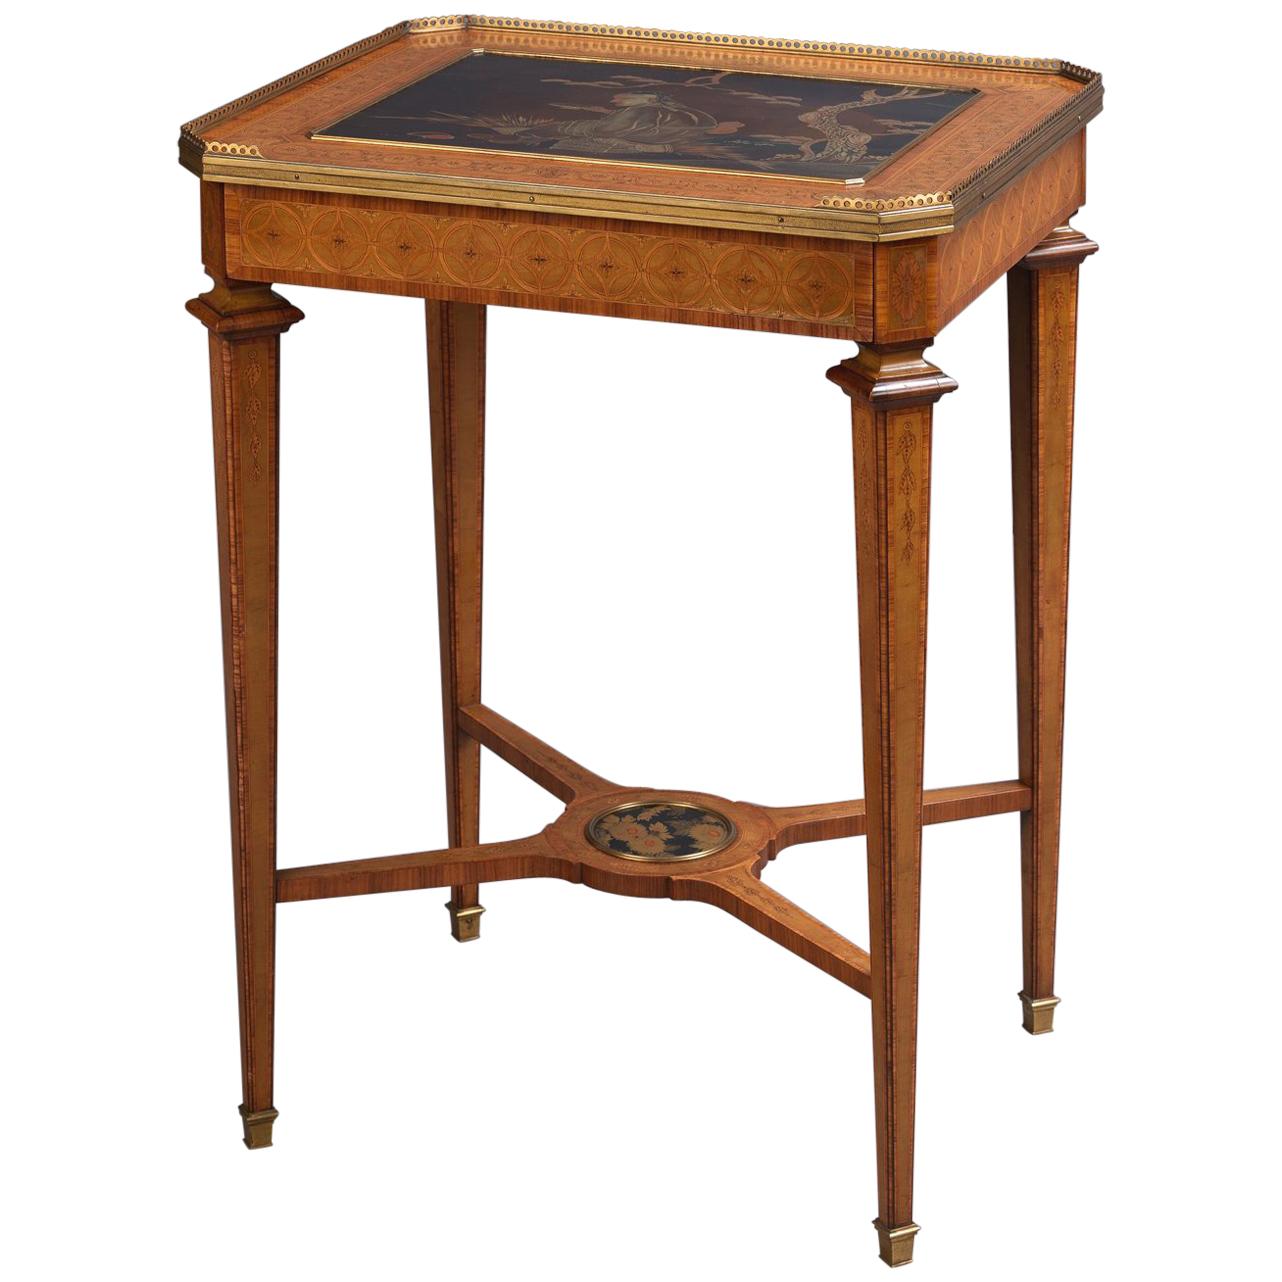 Marquetry Inlaid Table with a Lacquer Top Retailed by Boin Taburet, circa 1880 For Sale